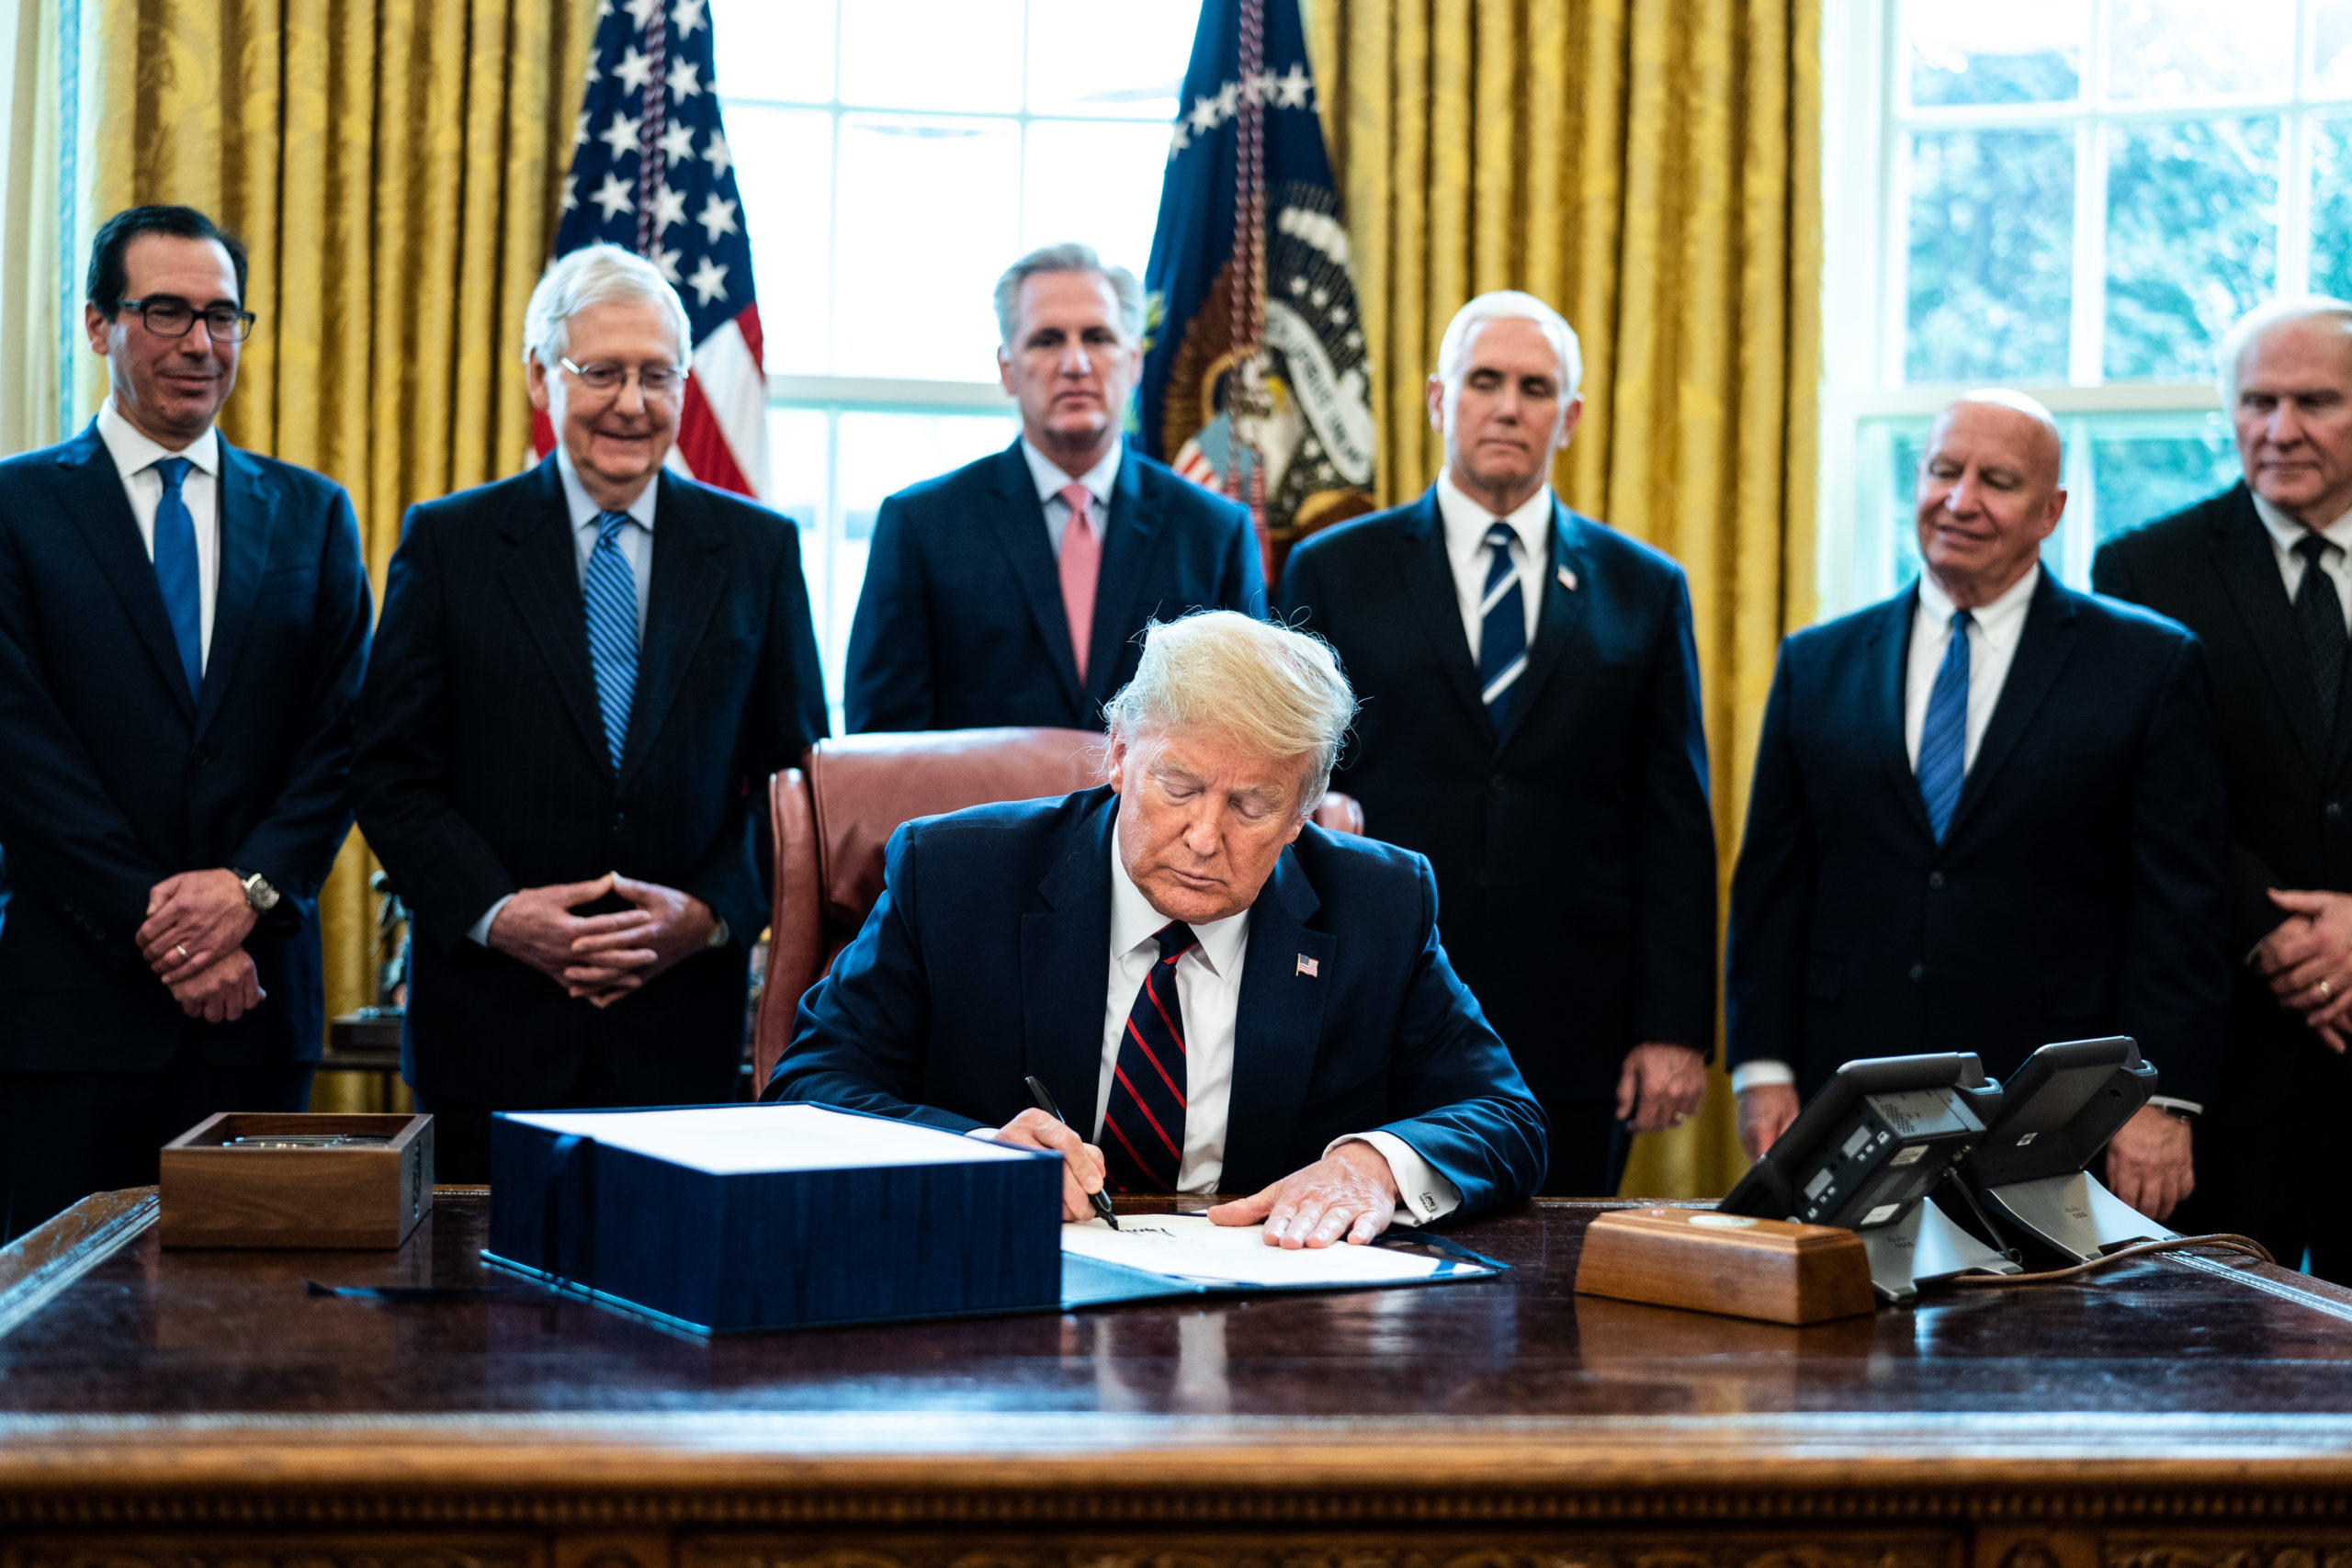 WASHINGTON, DC - MARCH 27: U.S. President Donald Trump signs H.R. 748, the CARES Act in the Oval Office of the White House on March 27, 2020 in Washington, DC. (Photo by Erin Schaff-Pool/Getty Images)